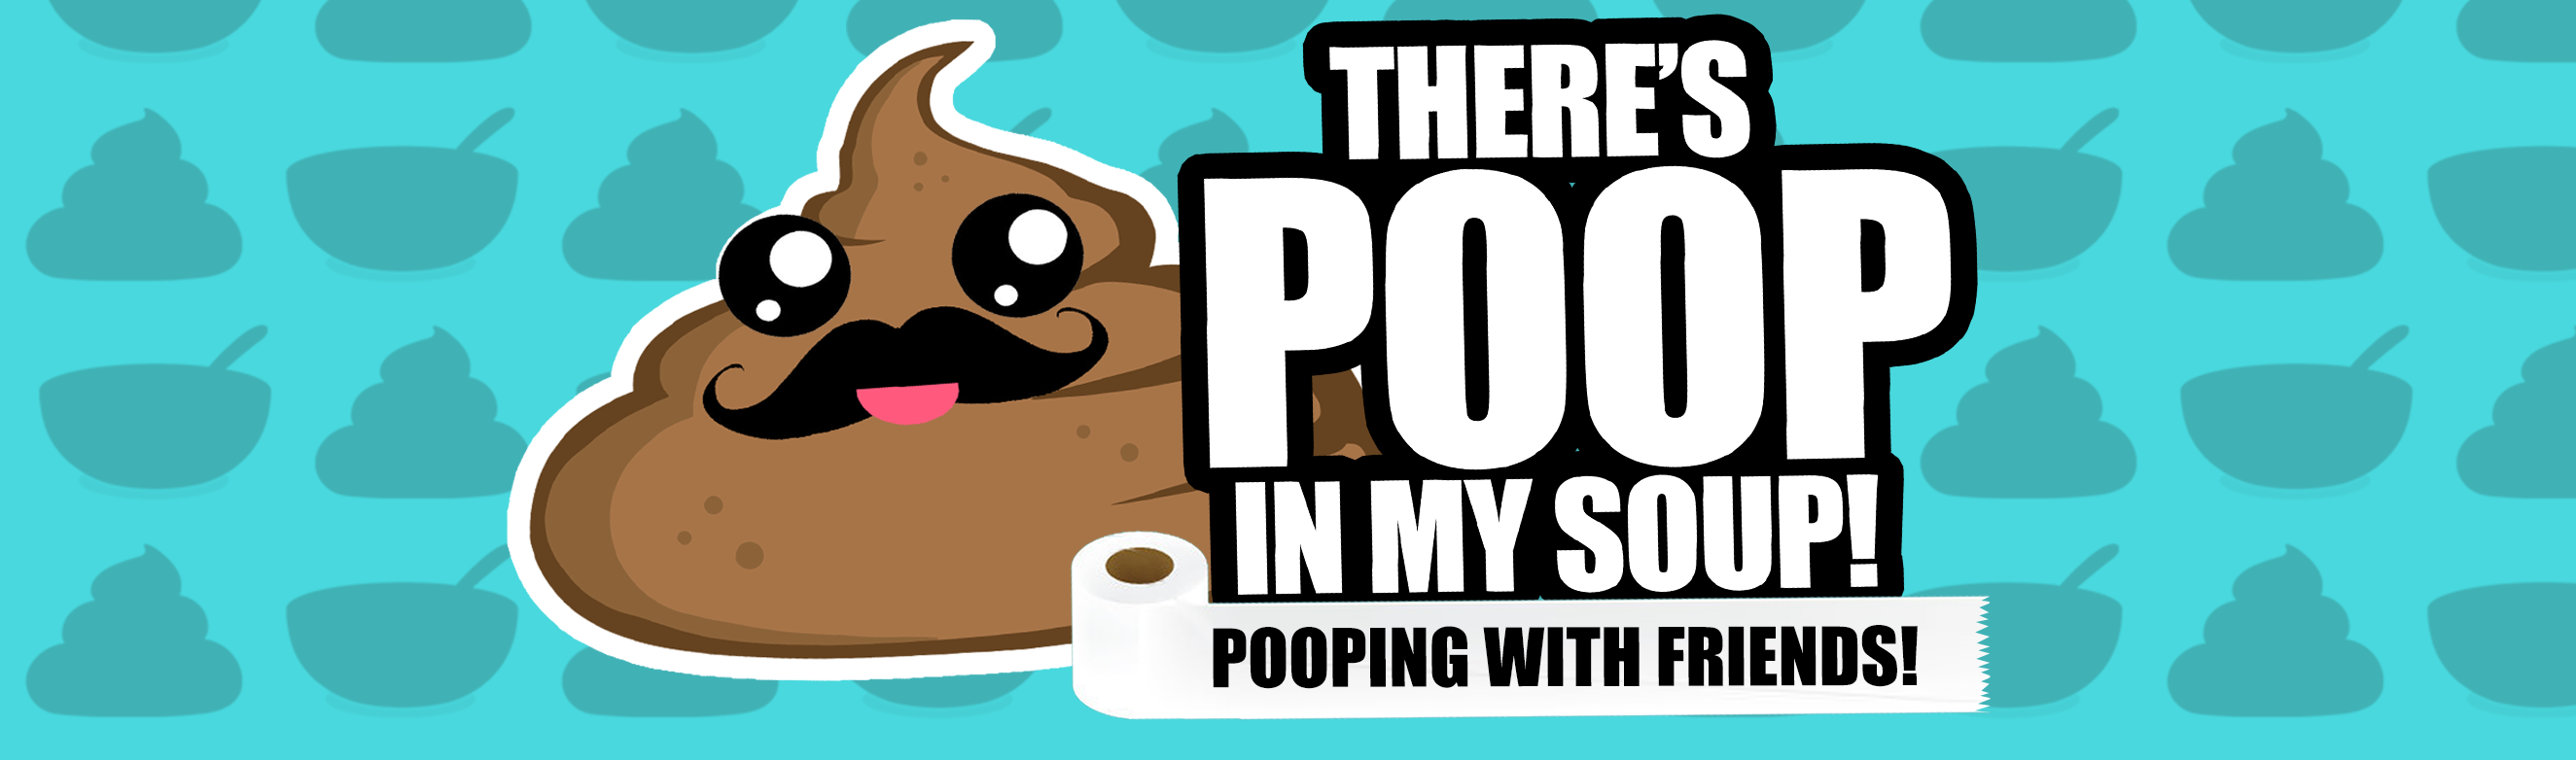 Theres poop in my soup: Pooping with friends